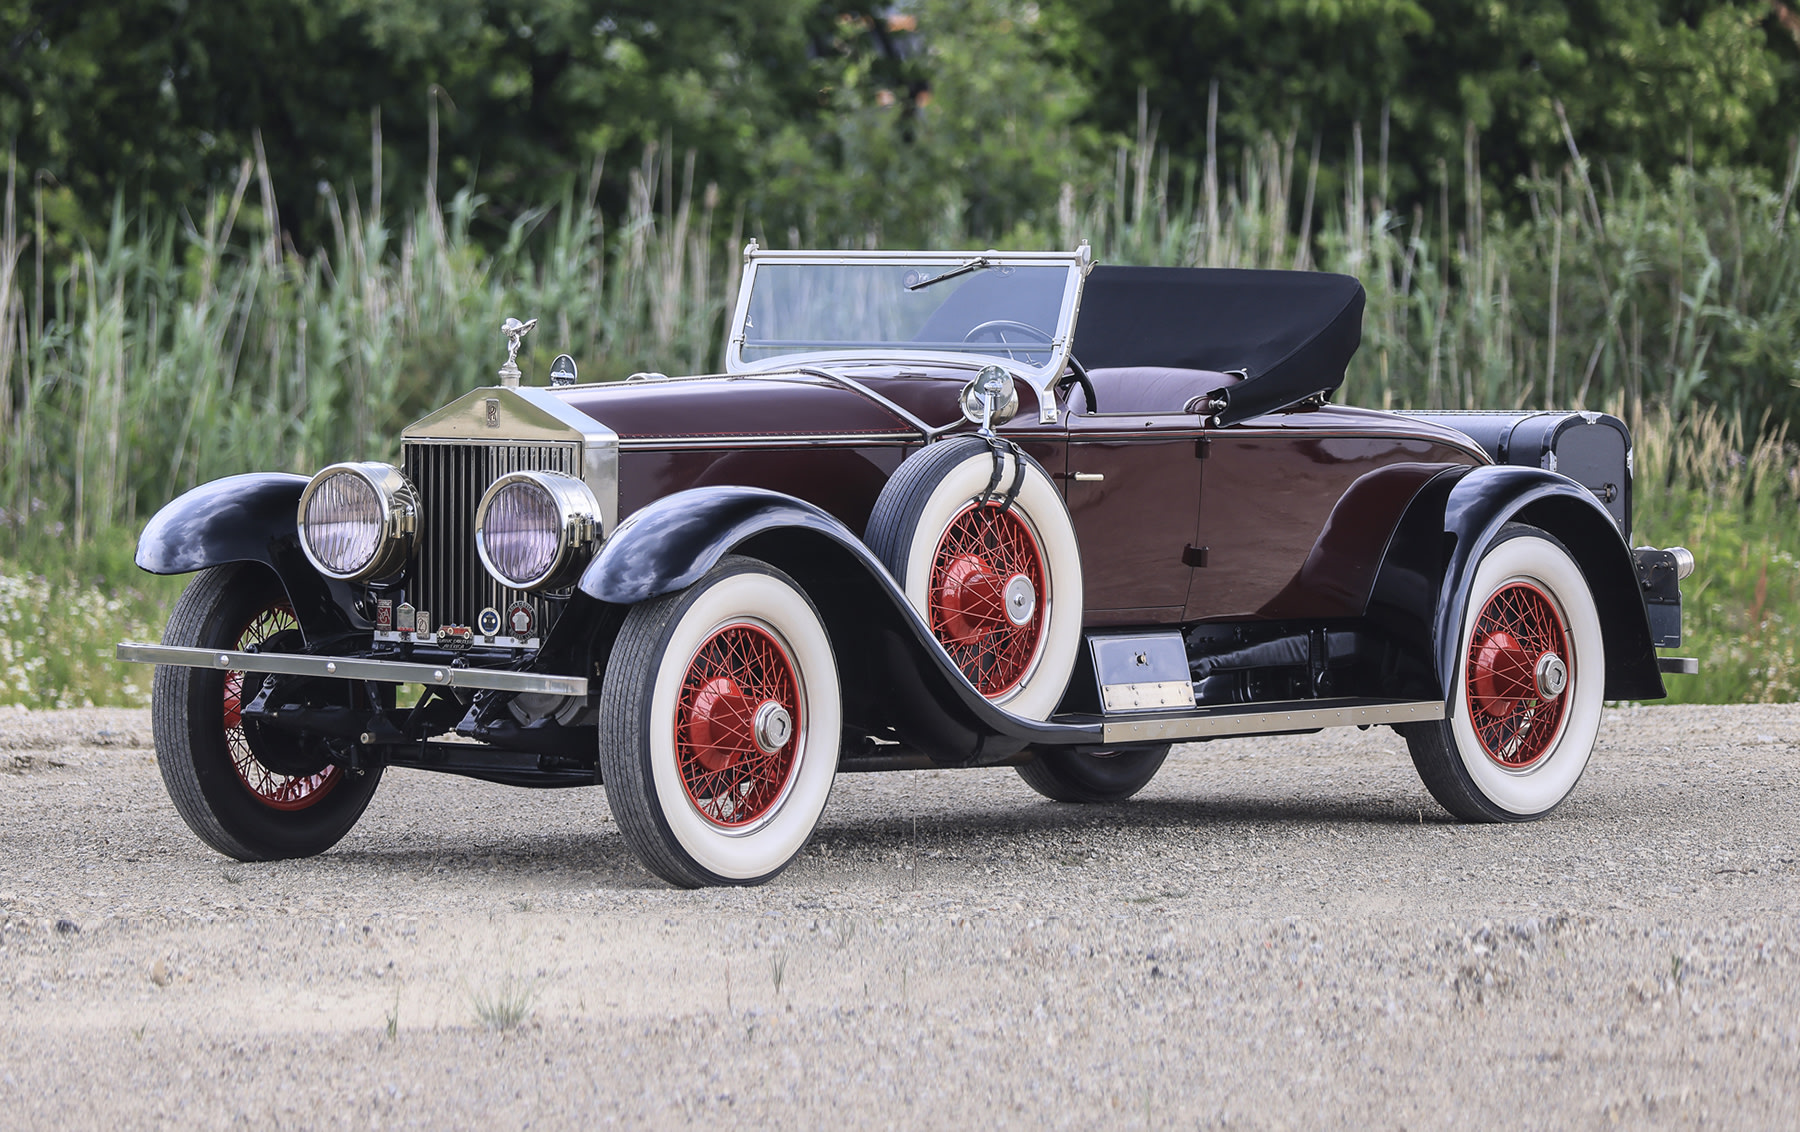 1925 Rolls-Royce Silver Ghost Piccadilly Roadster (PB24)